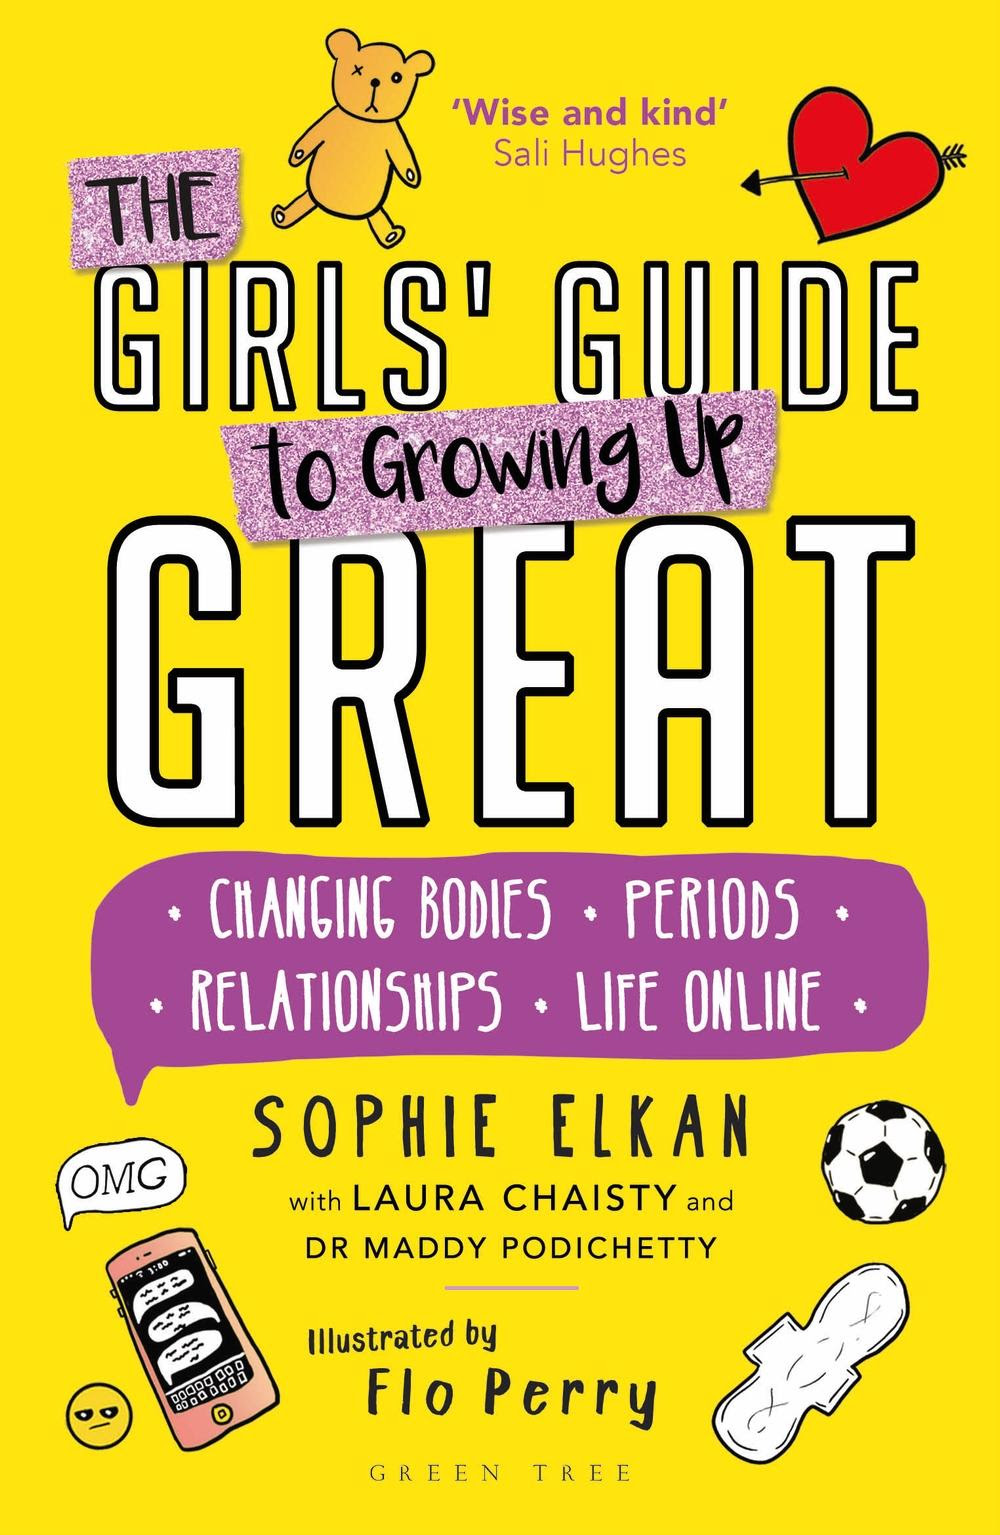 The Girls' Guide to Growing Up Great: Changing Bodies, Periods, Relationships, Life Online PDF